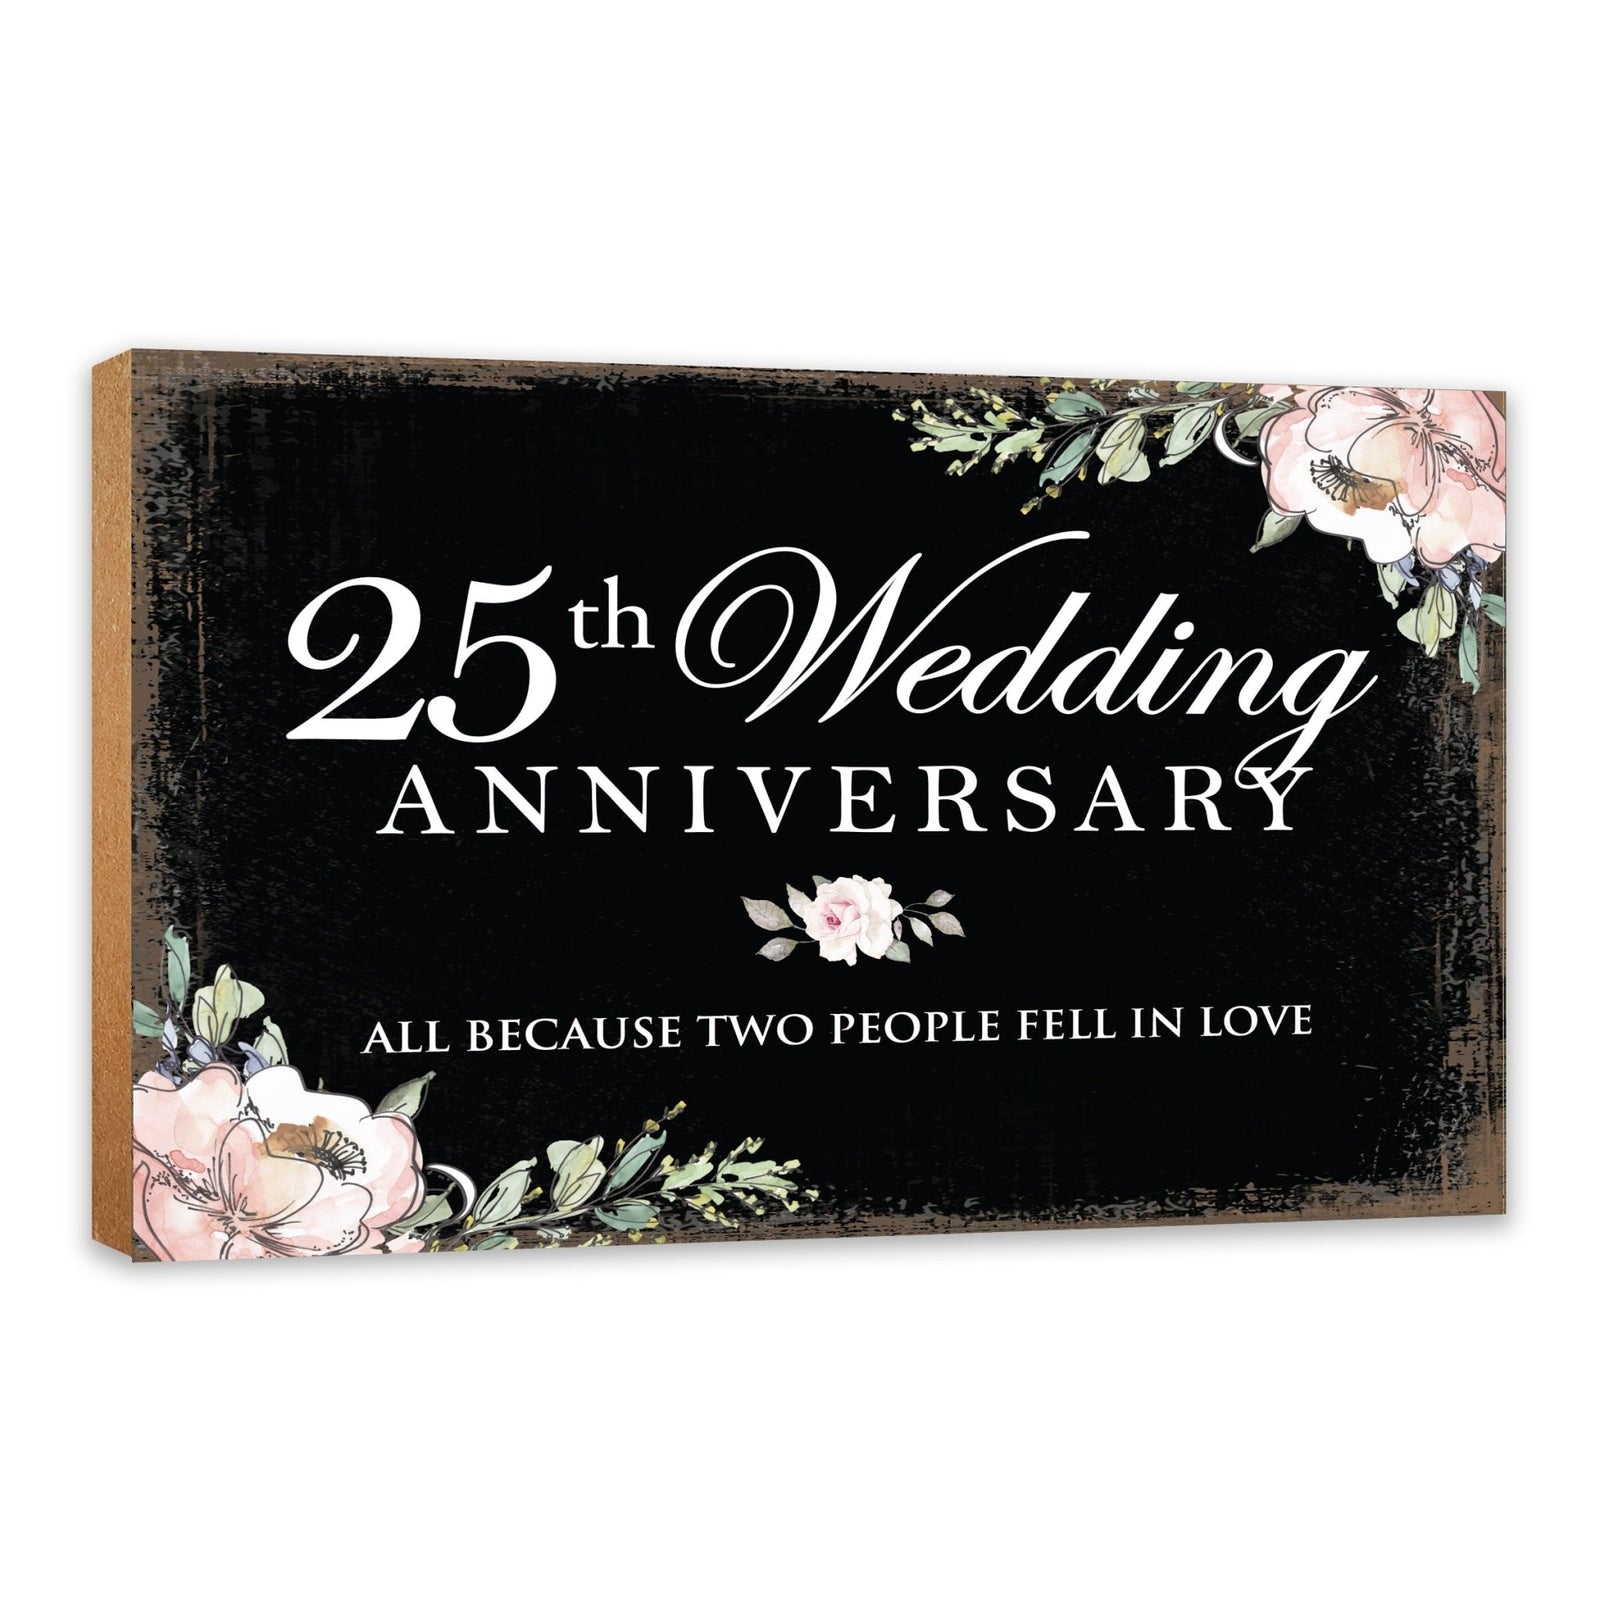 25th Wedding Anniversary Unique Shelf Decor and Tabletop Signs Gifts for Couples - Fell In Love - LifeSong Milestones